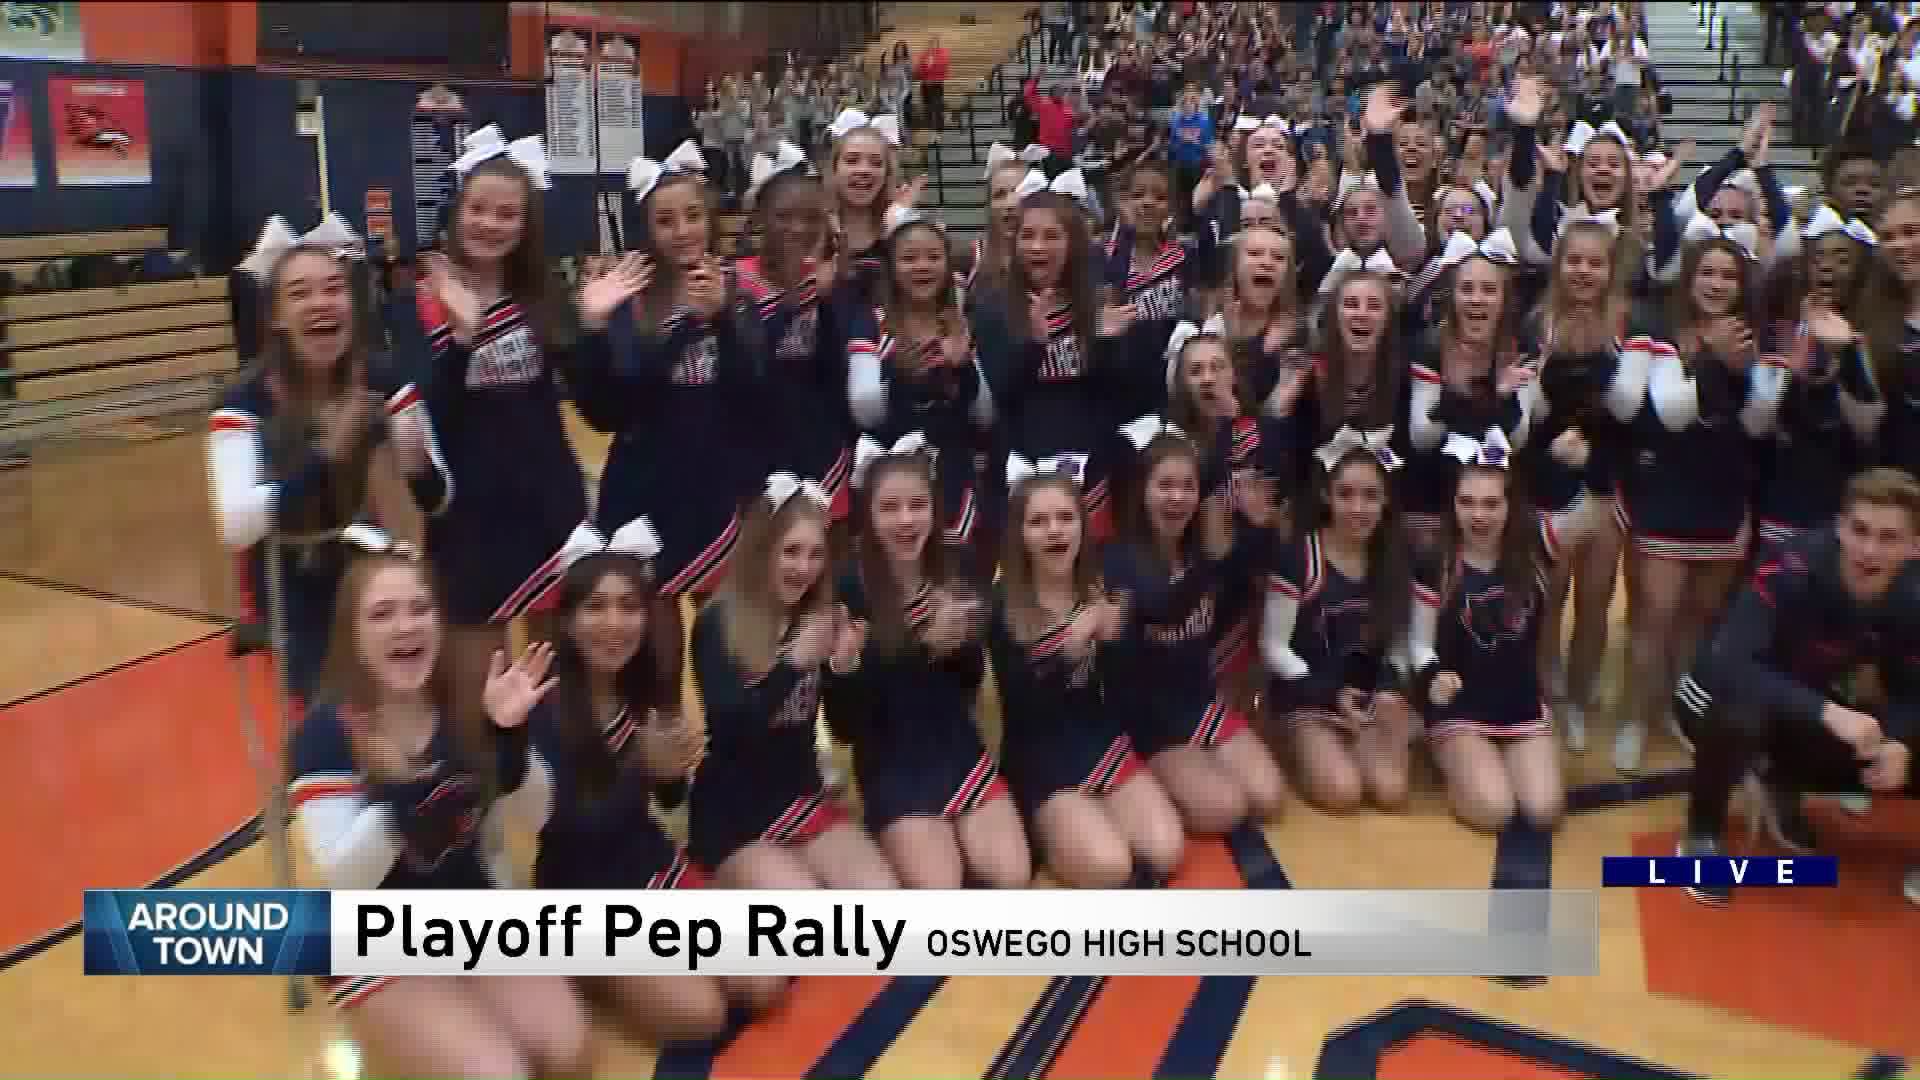 Around Town has a pep rally at Oswego High School for the first round of the IHSA football playoffs